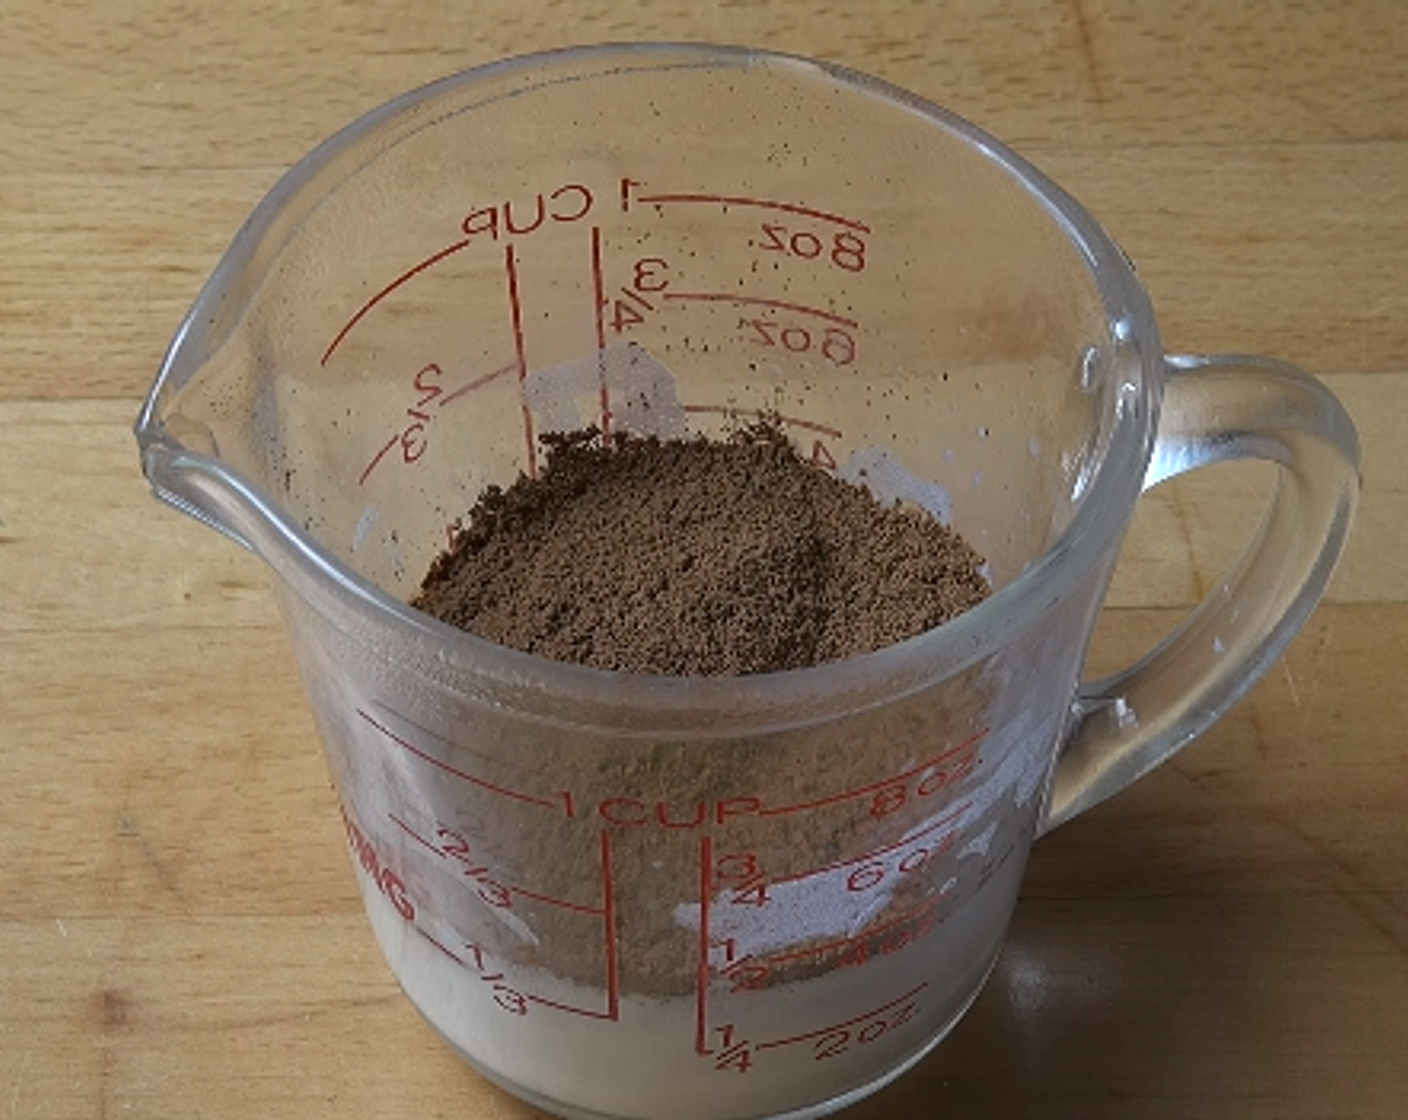 step 4 Heat Milk (1/4 cup) in microwave until hot and add Instant Coffee (2 Tbsp). Mix together.